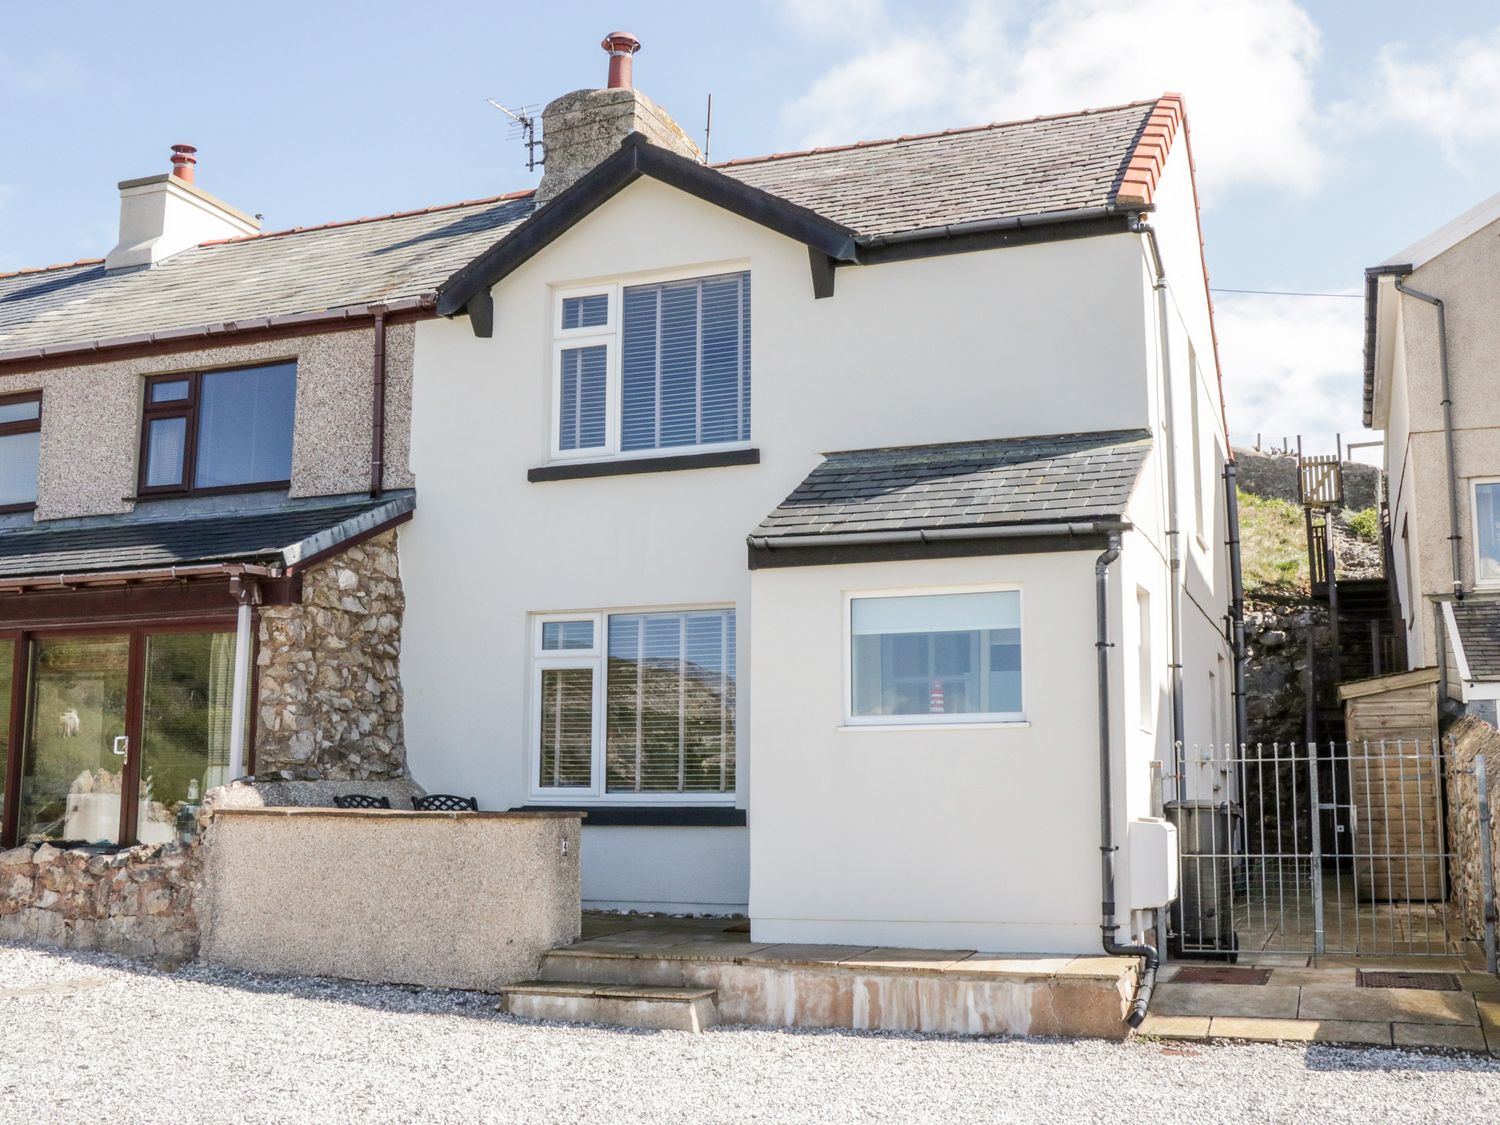 4 Anglesey Road - North Wales - 1058314 - photo 1